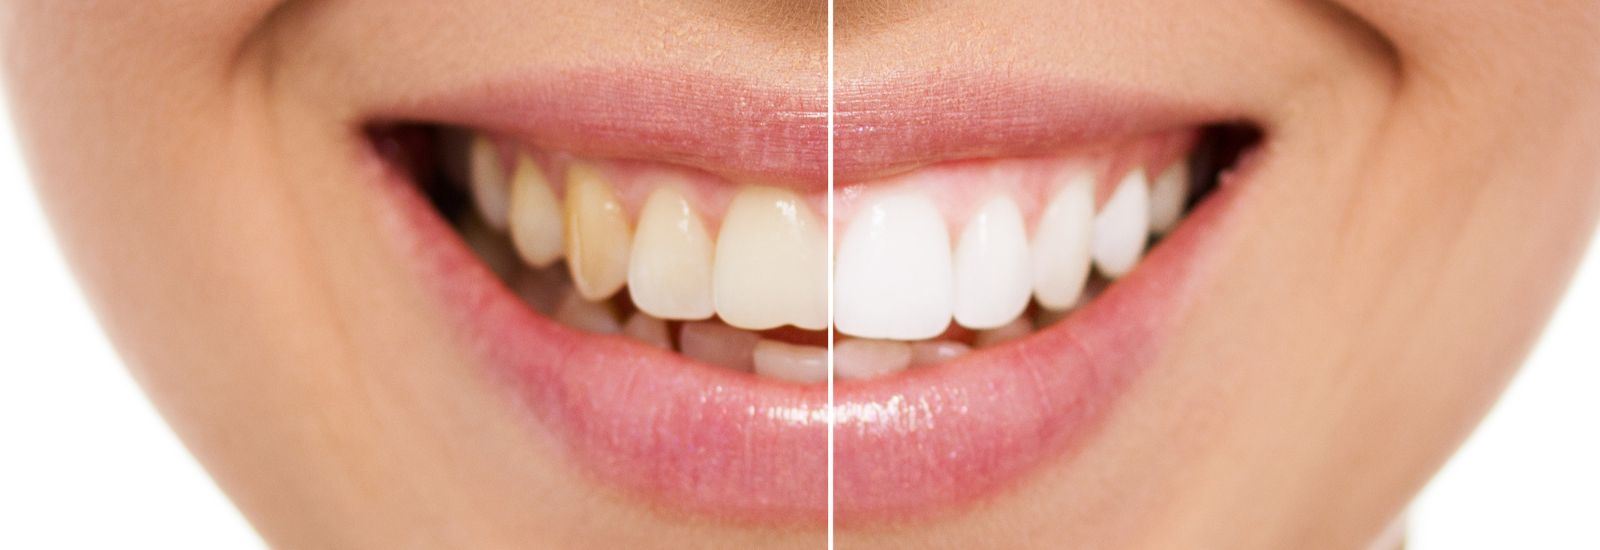 Whitening teeth color shown by a girl